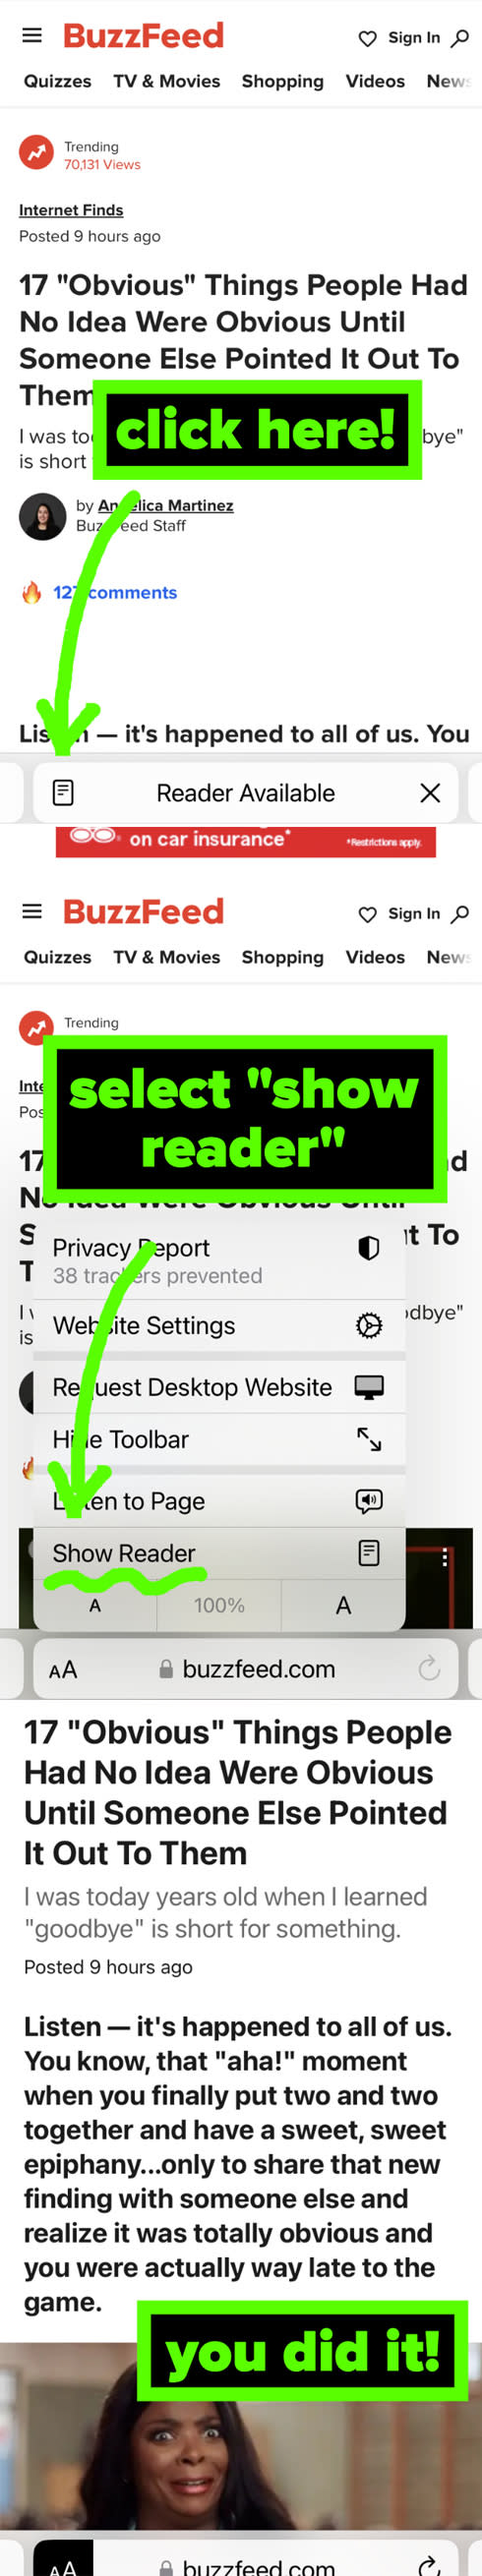 Graphic showing how to put a page in "Reader Mode"